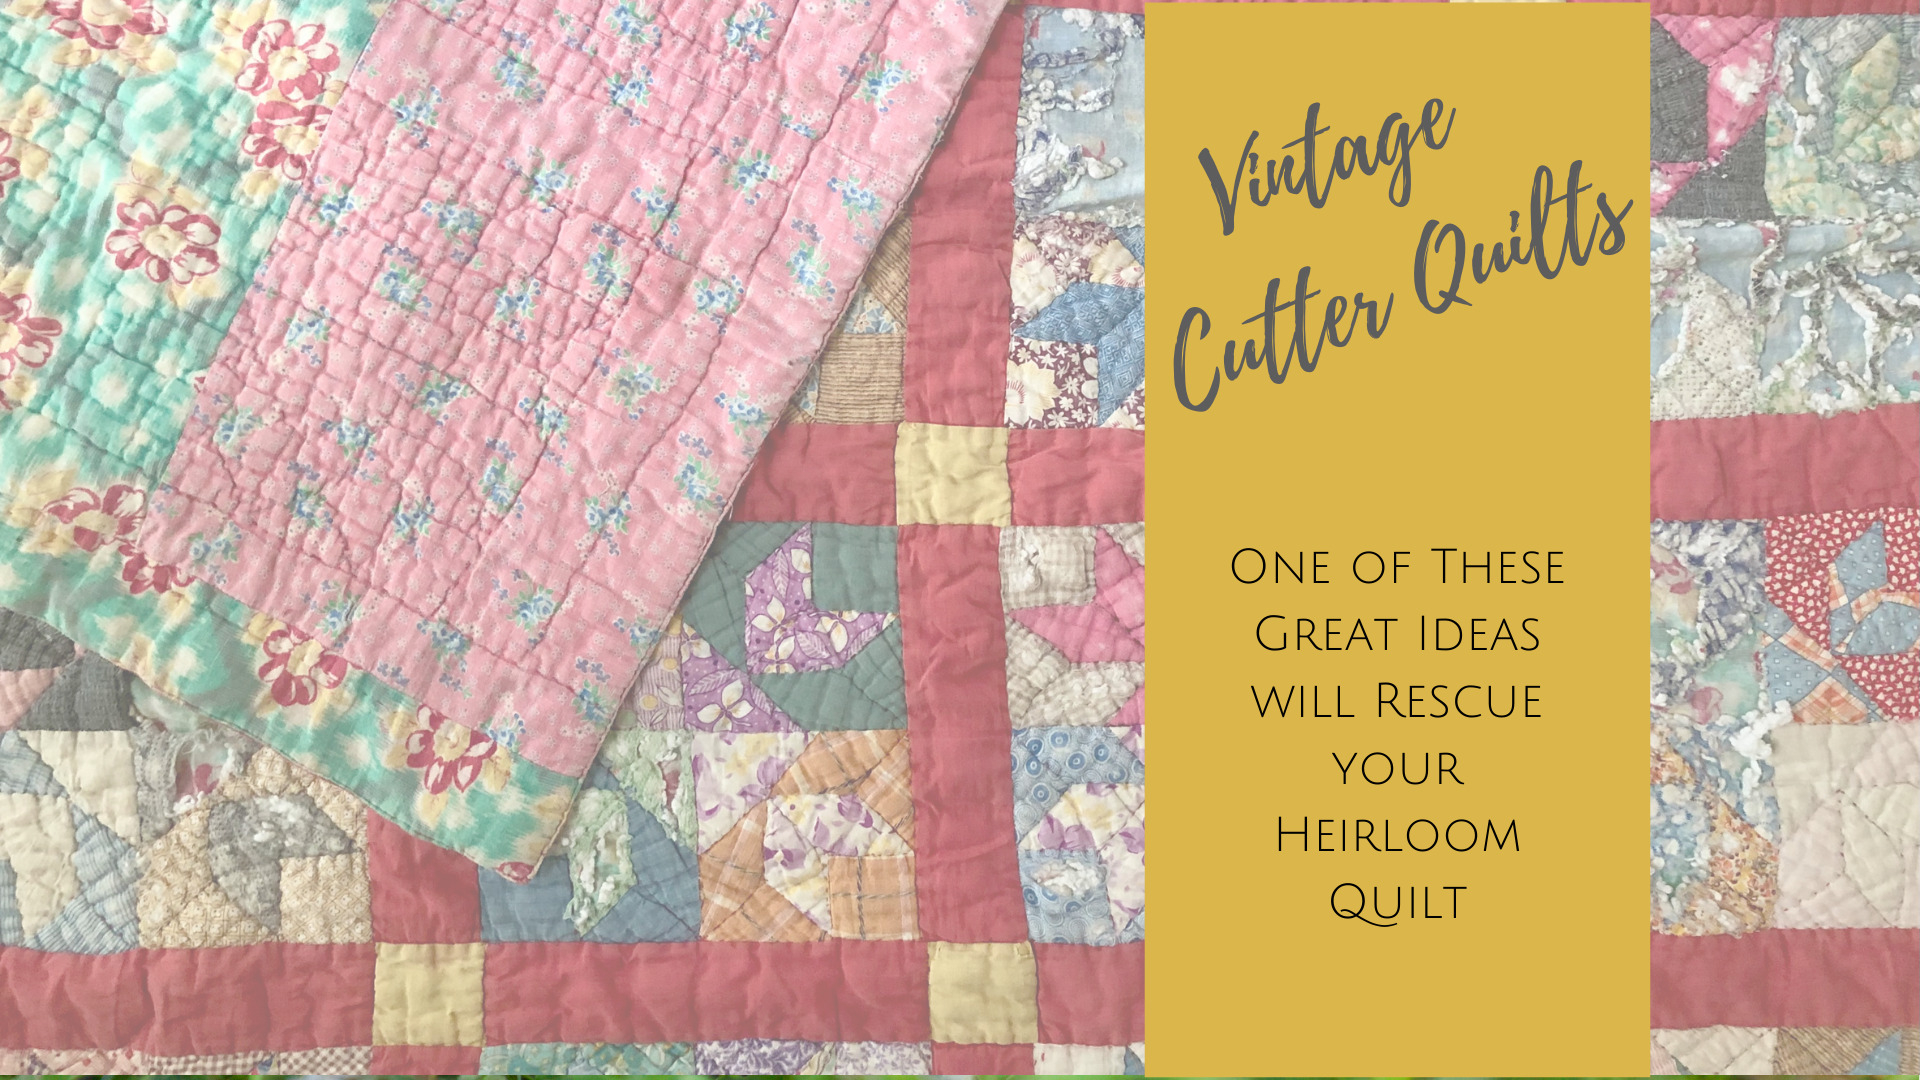 What Does Cutter Quilt Mean?